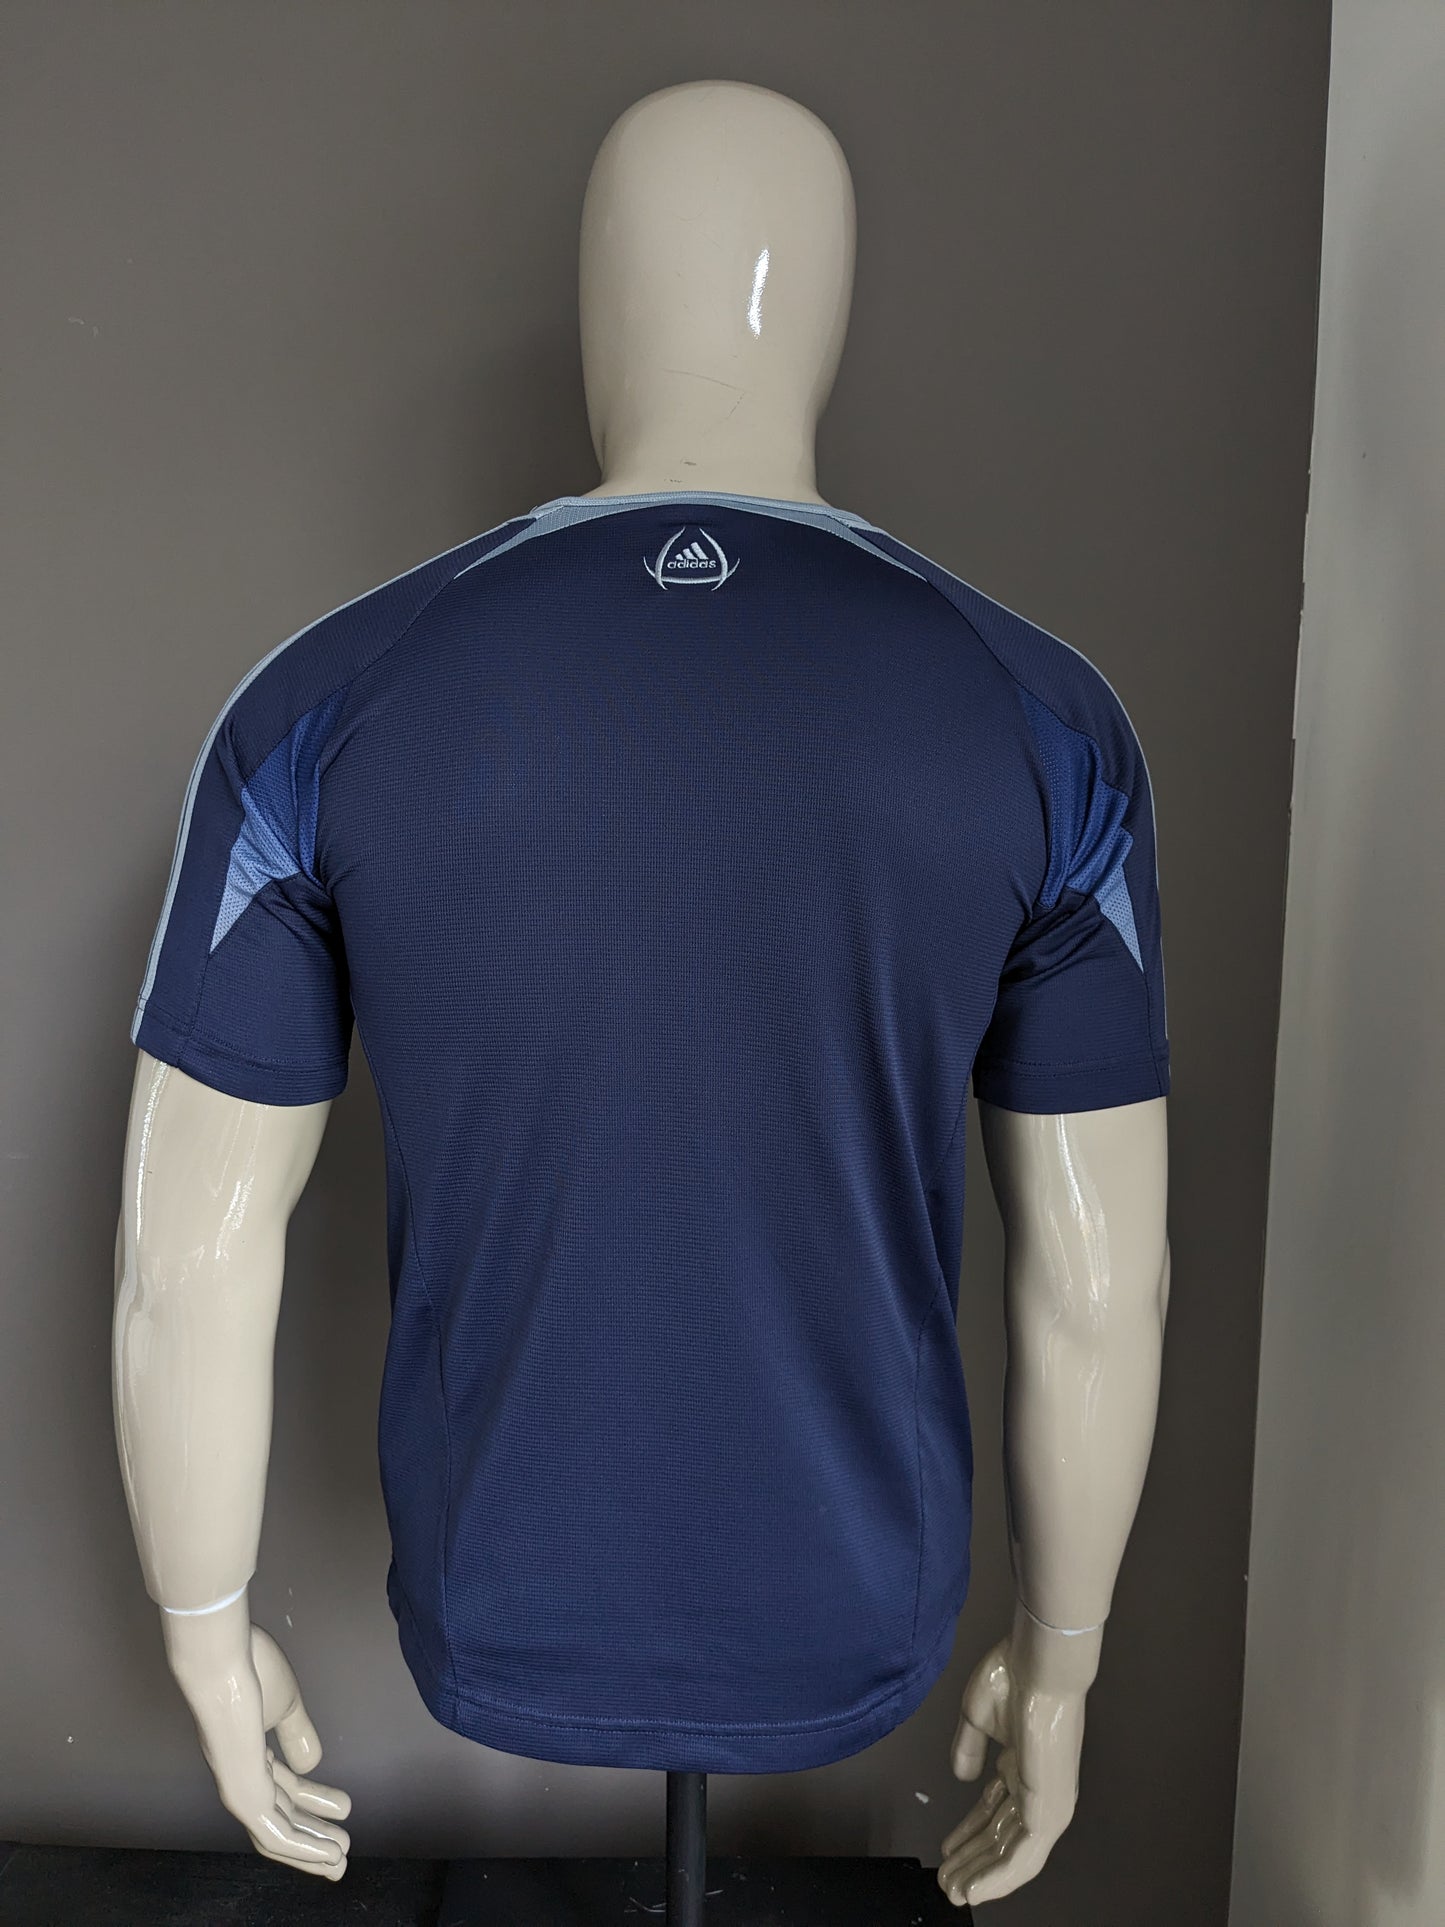 Adidas Sport shirt. Blue colored. Size S.